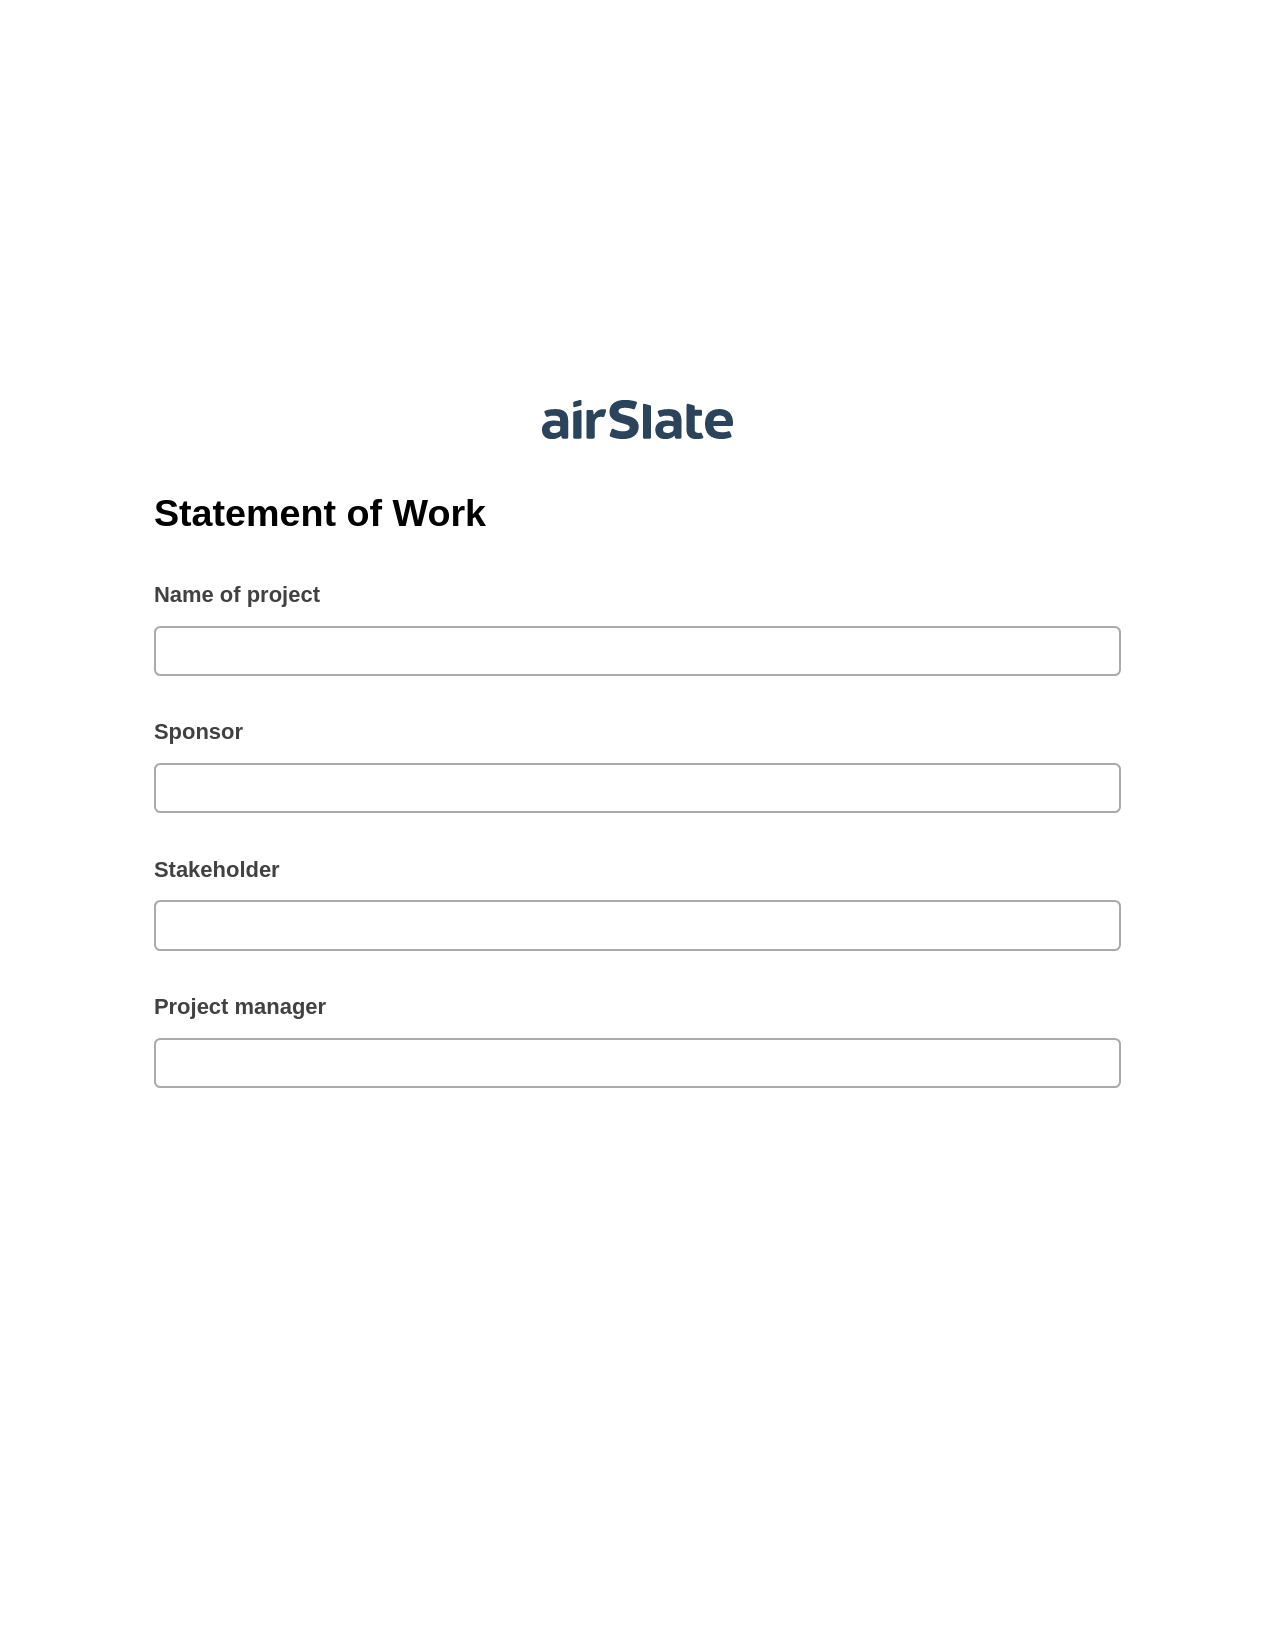 Statement of Work Pre-fill from Google Sheet Dropdown Options Bot, In-person Signing Bot, Webhook Postfinish Bot